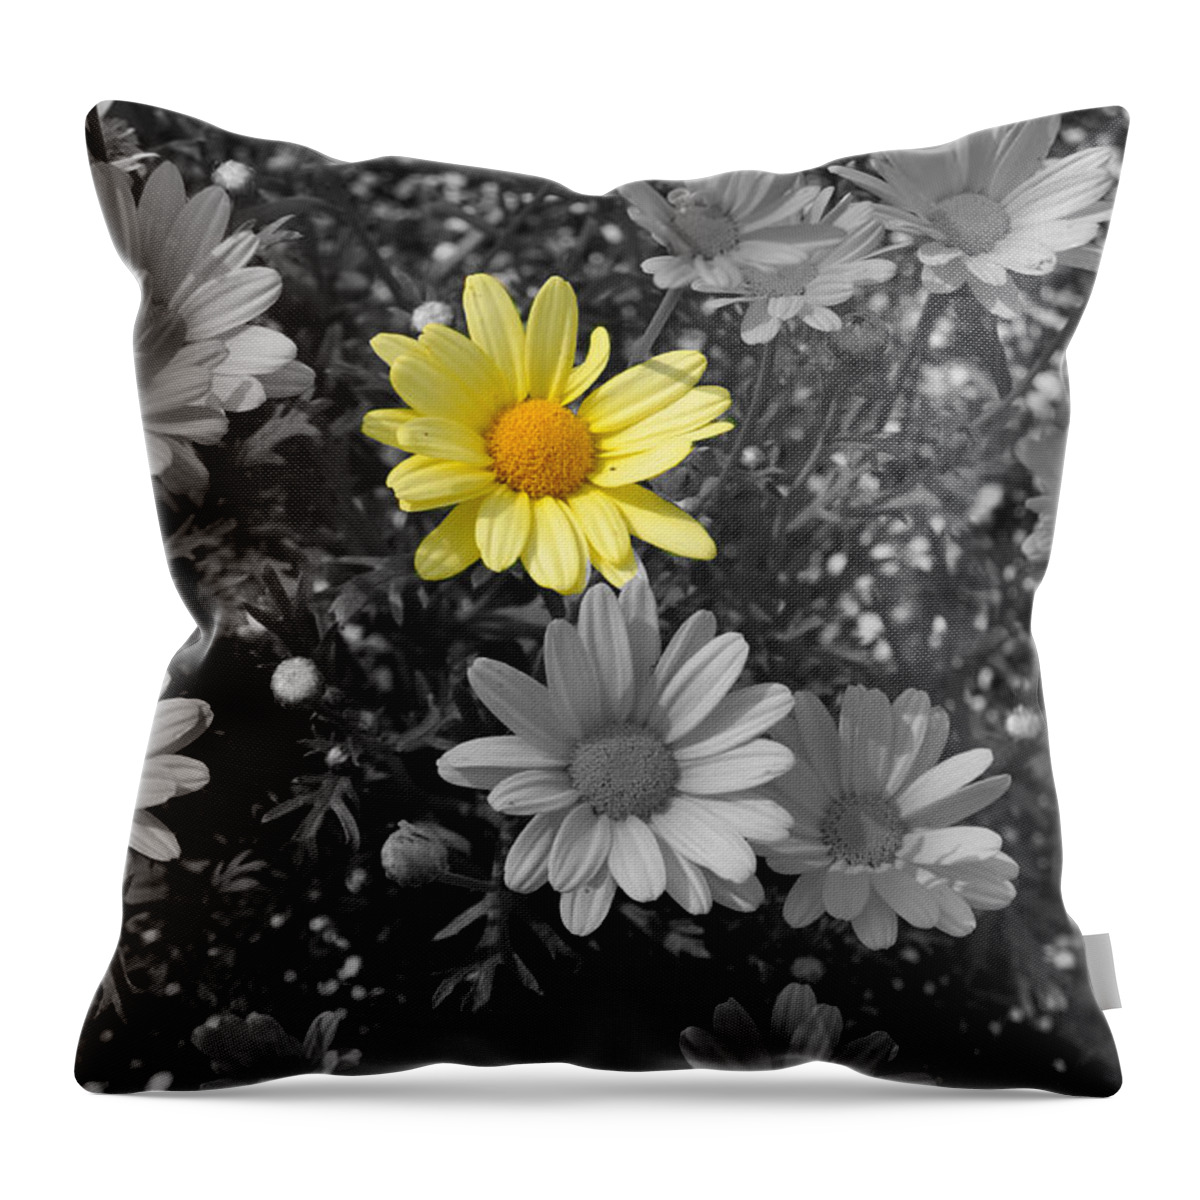 Diane Berry Throw Pillow featuring the photograph He Loves Me by Diane E Berry